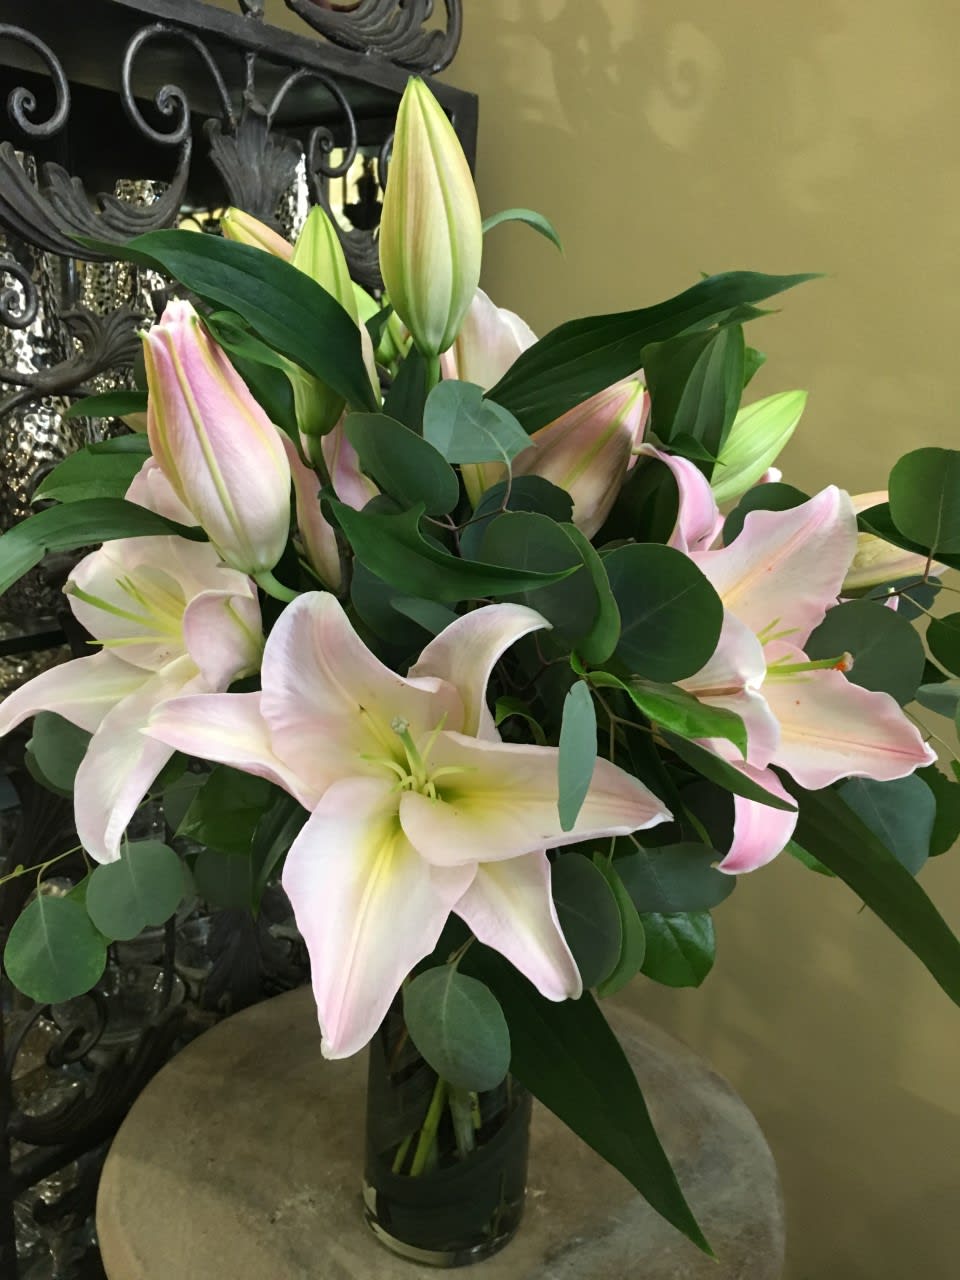 Elegant tall vase of long stem Oriental lilies, a lasting gift to